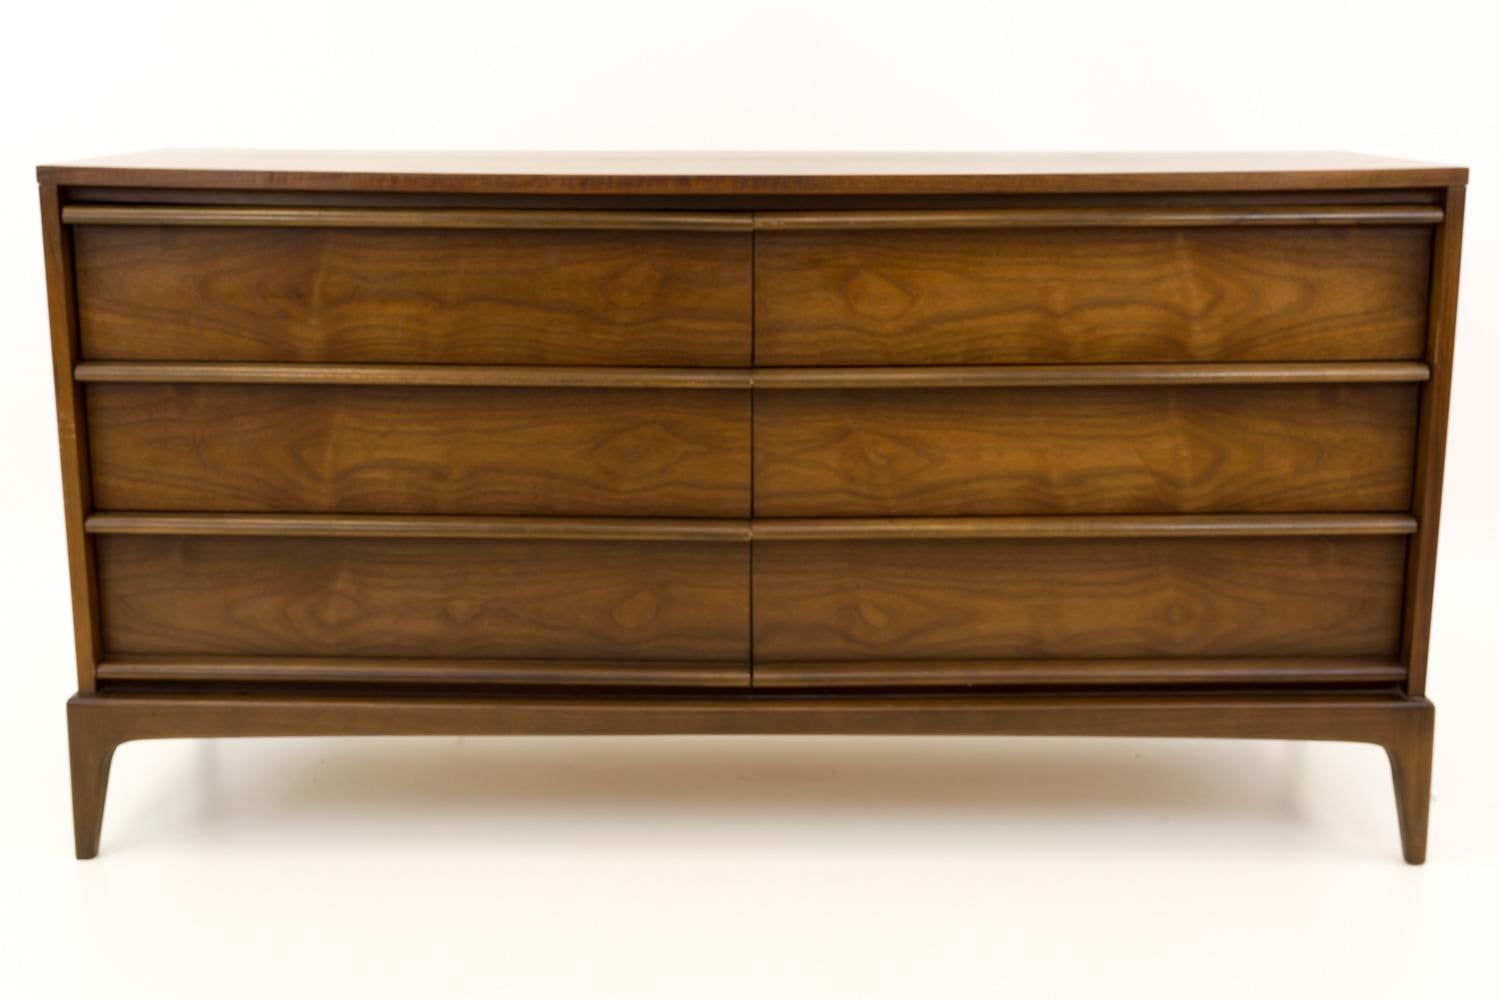 Paul McCobb style Lane rhythm mid century walnut 6 drawer lowboy dresser
Dresser measures: 60 wide x 18 deep x 31.5 inches high

?All pieces of furniture can be had in what we call restored vintage condition. That means the piece is restored upon